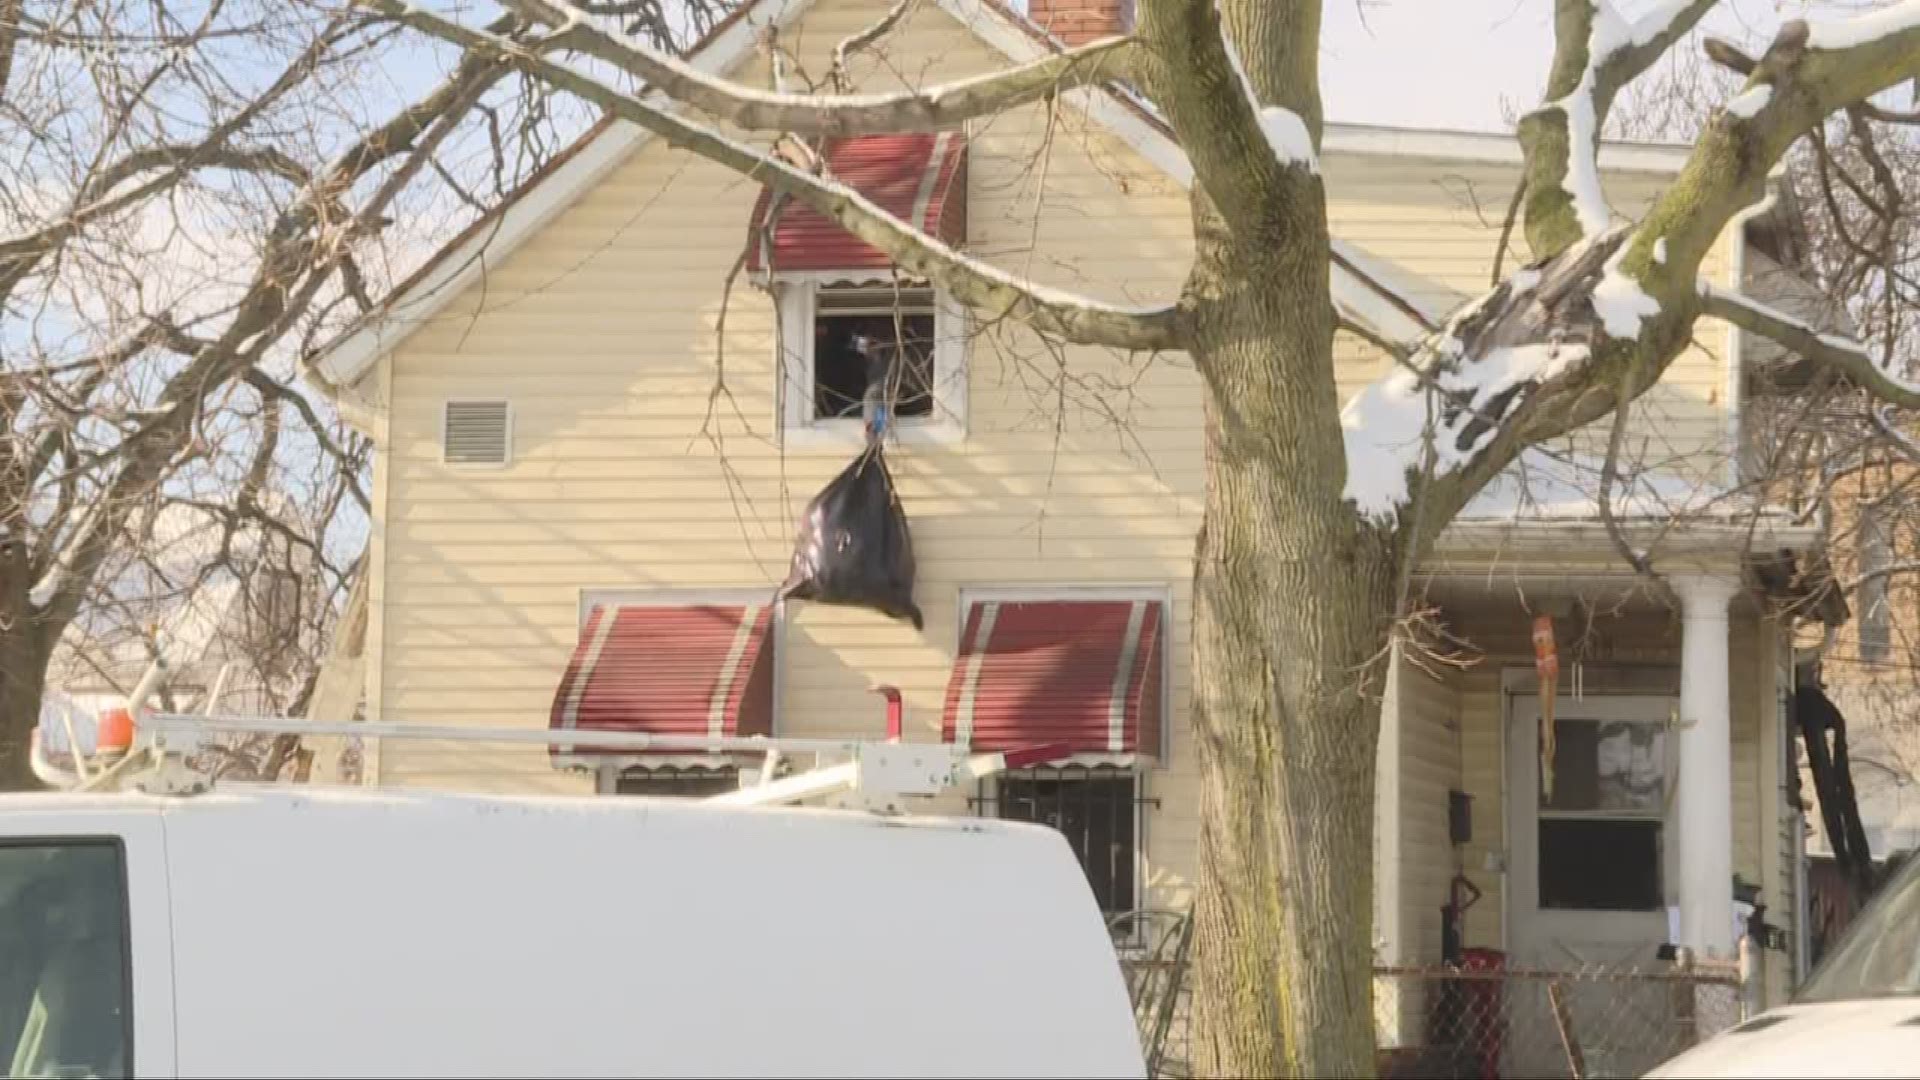 Unattended candles cause house fire near Slavic Village